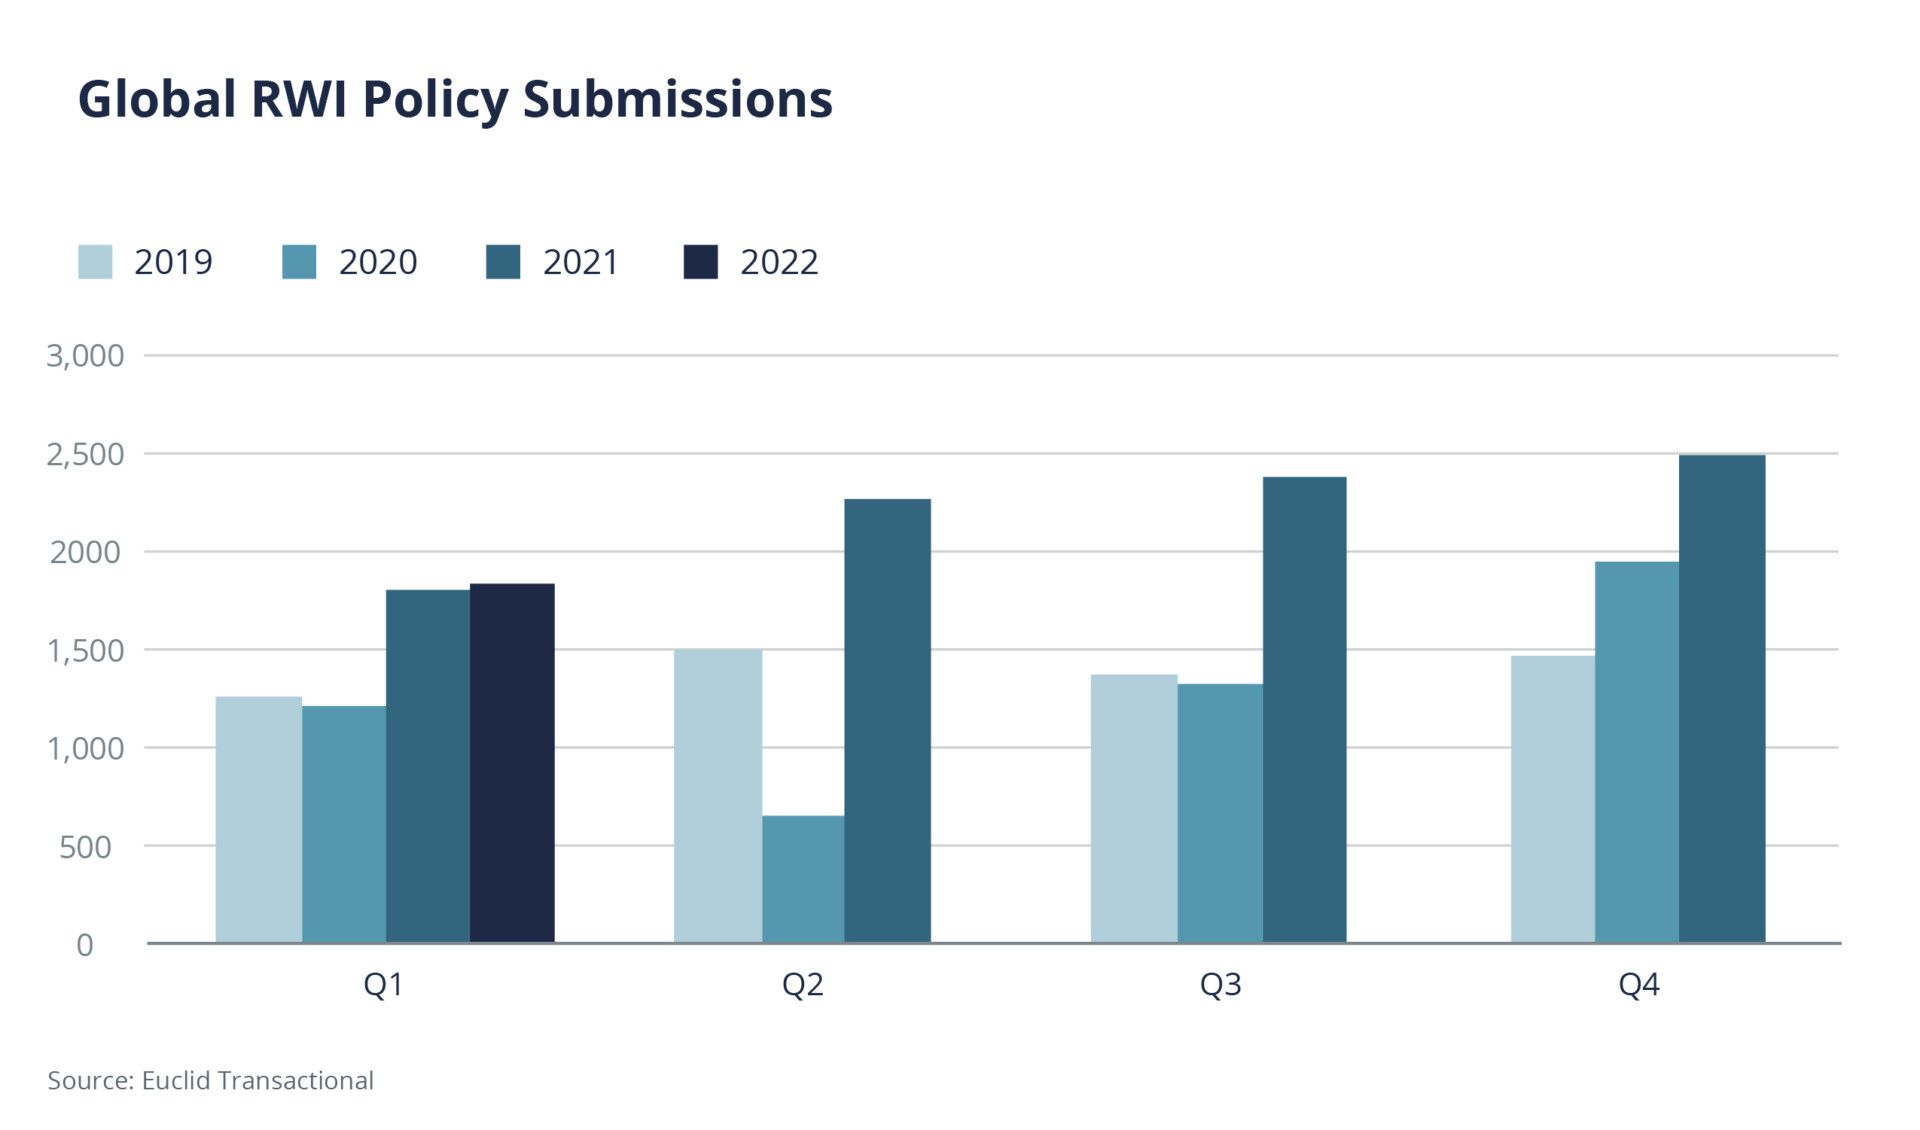 Global RWI Policy Submissions By Year